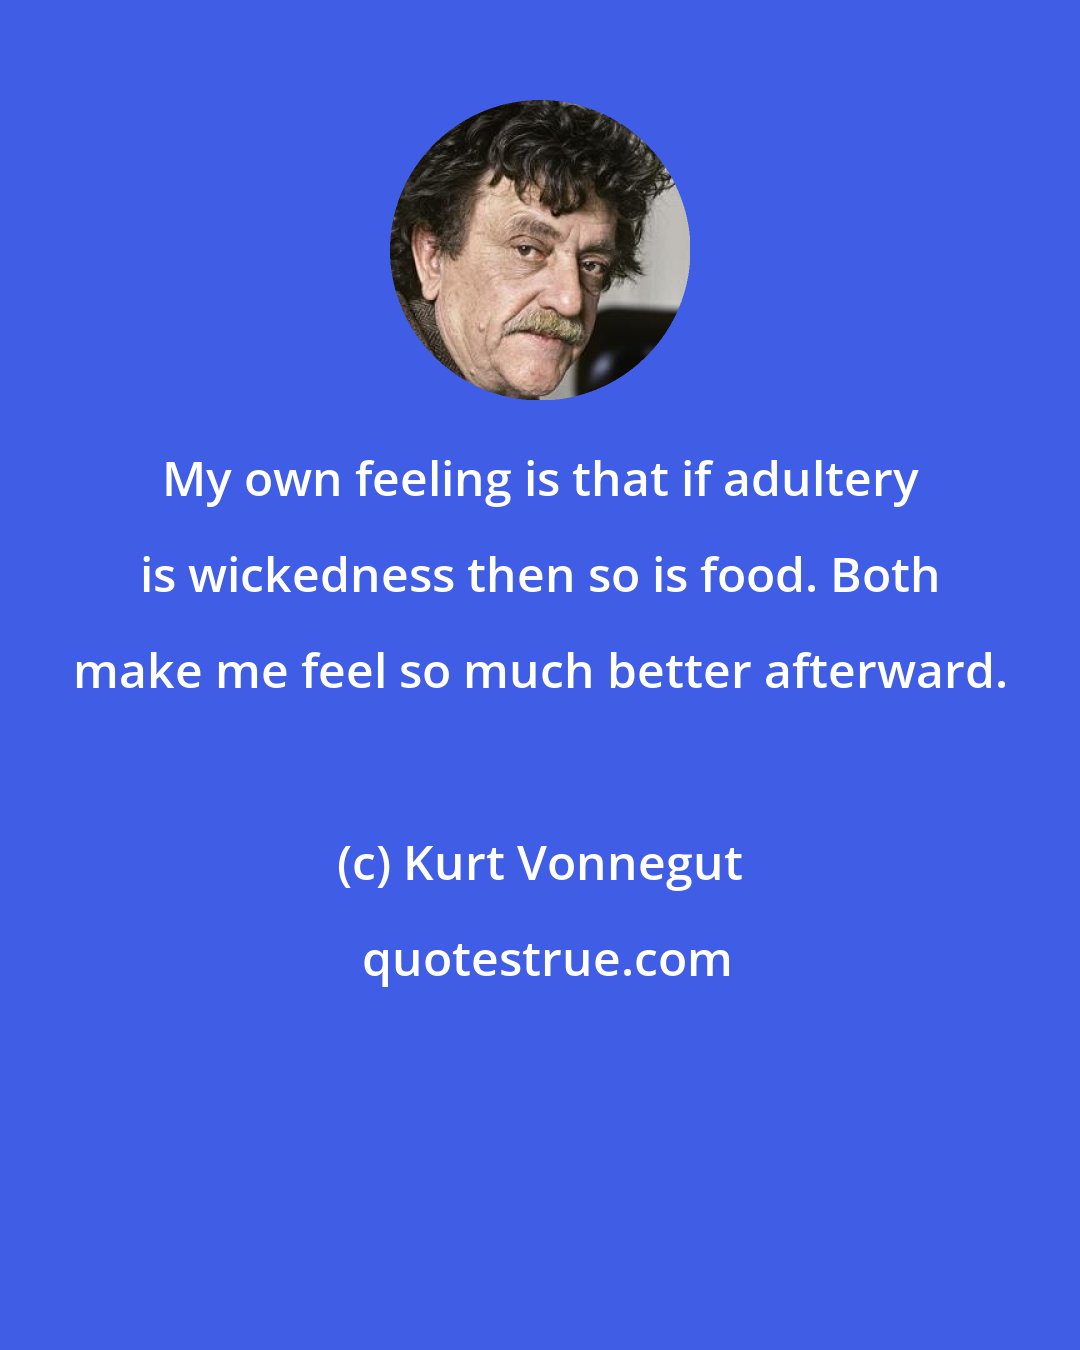 Kurt Vonnegut: My own feeling is that if adultery is wickedness then so is food. Both make me feel so much better afterward.